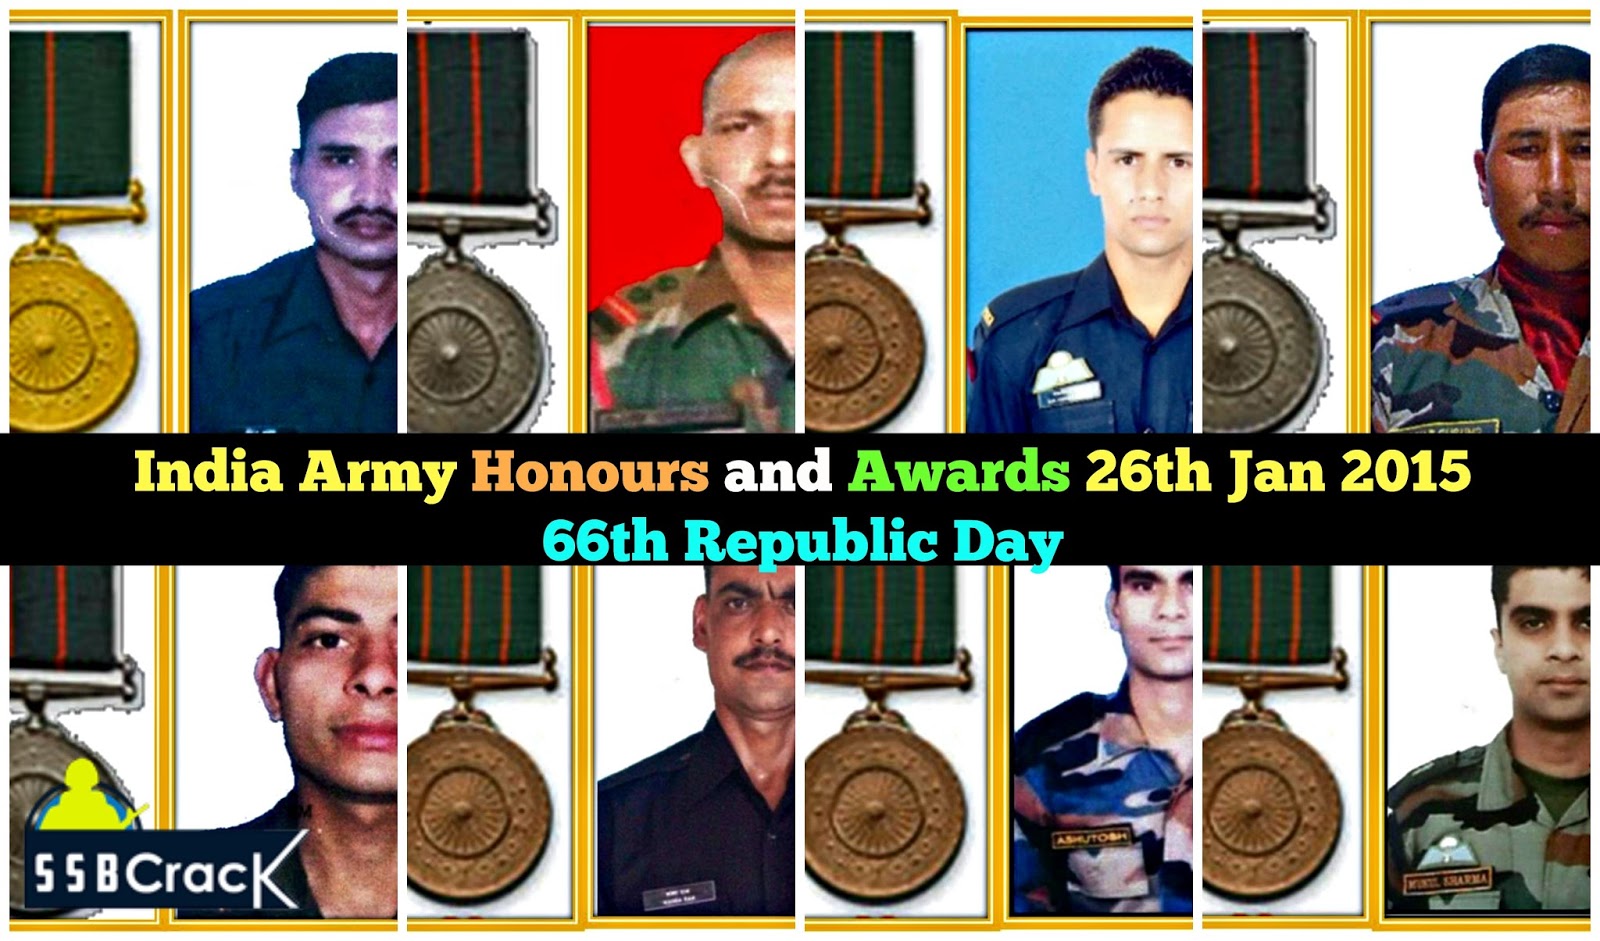 India Army Honours and Awards 26th Jan 2015 66th Republic Day